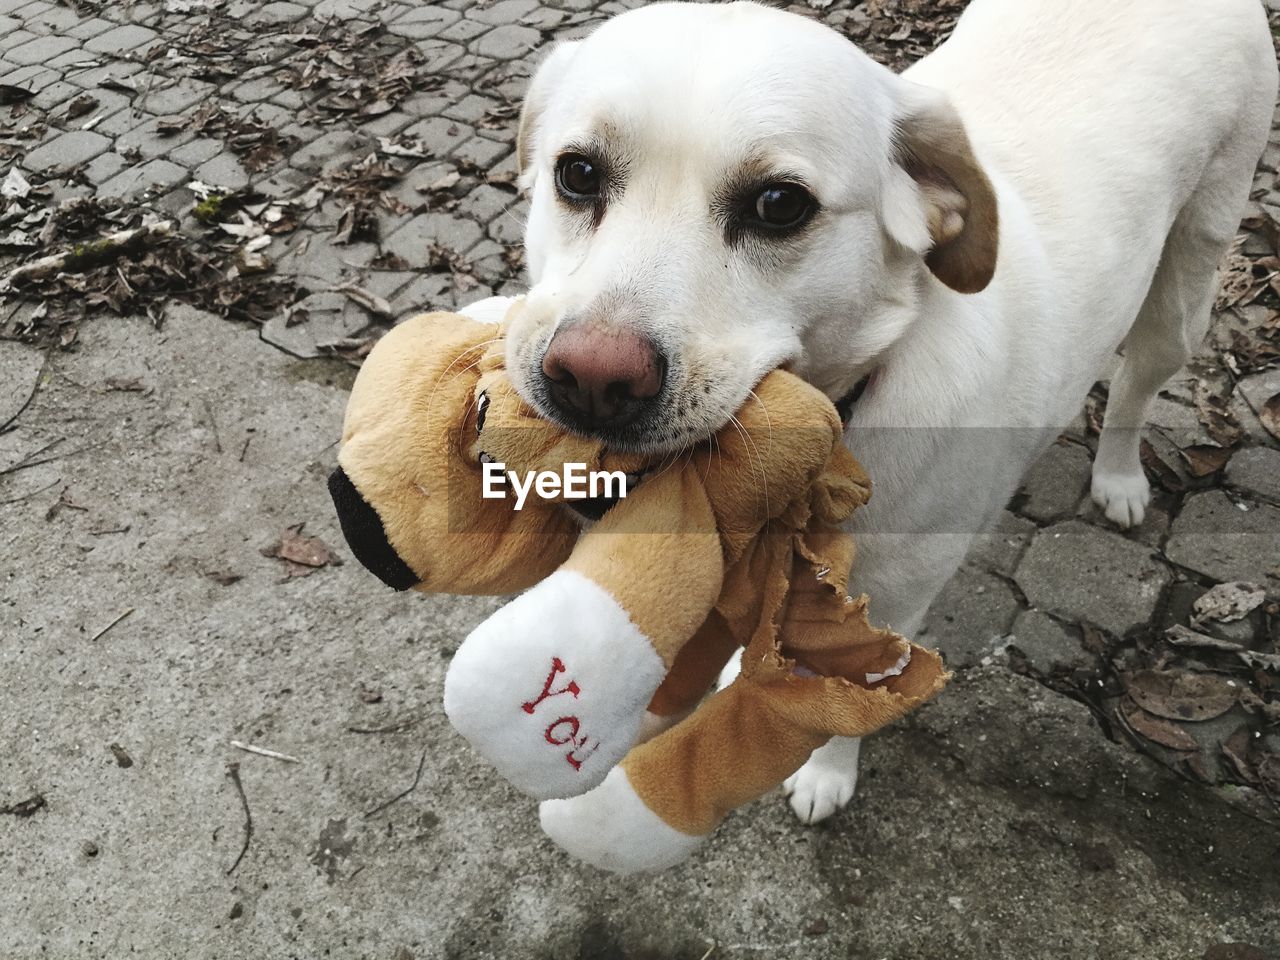 Portrait of dog carrying stuffed toy in mouth